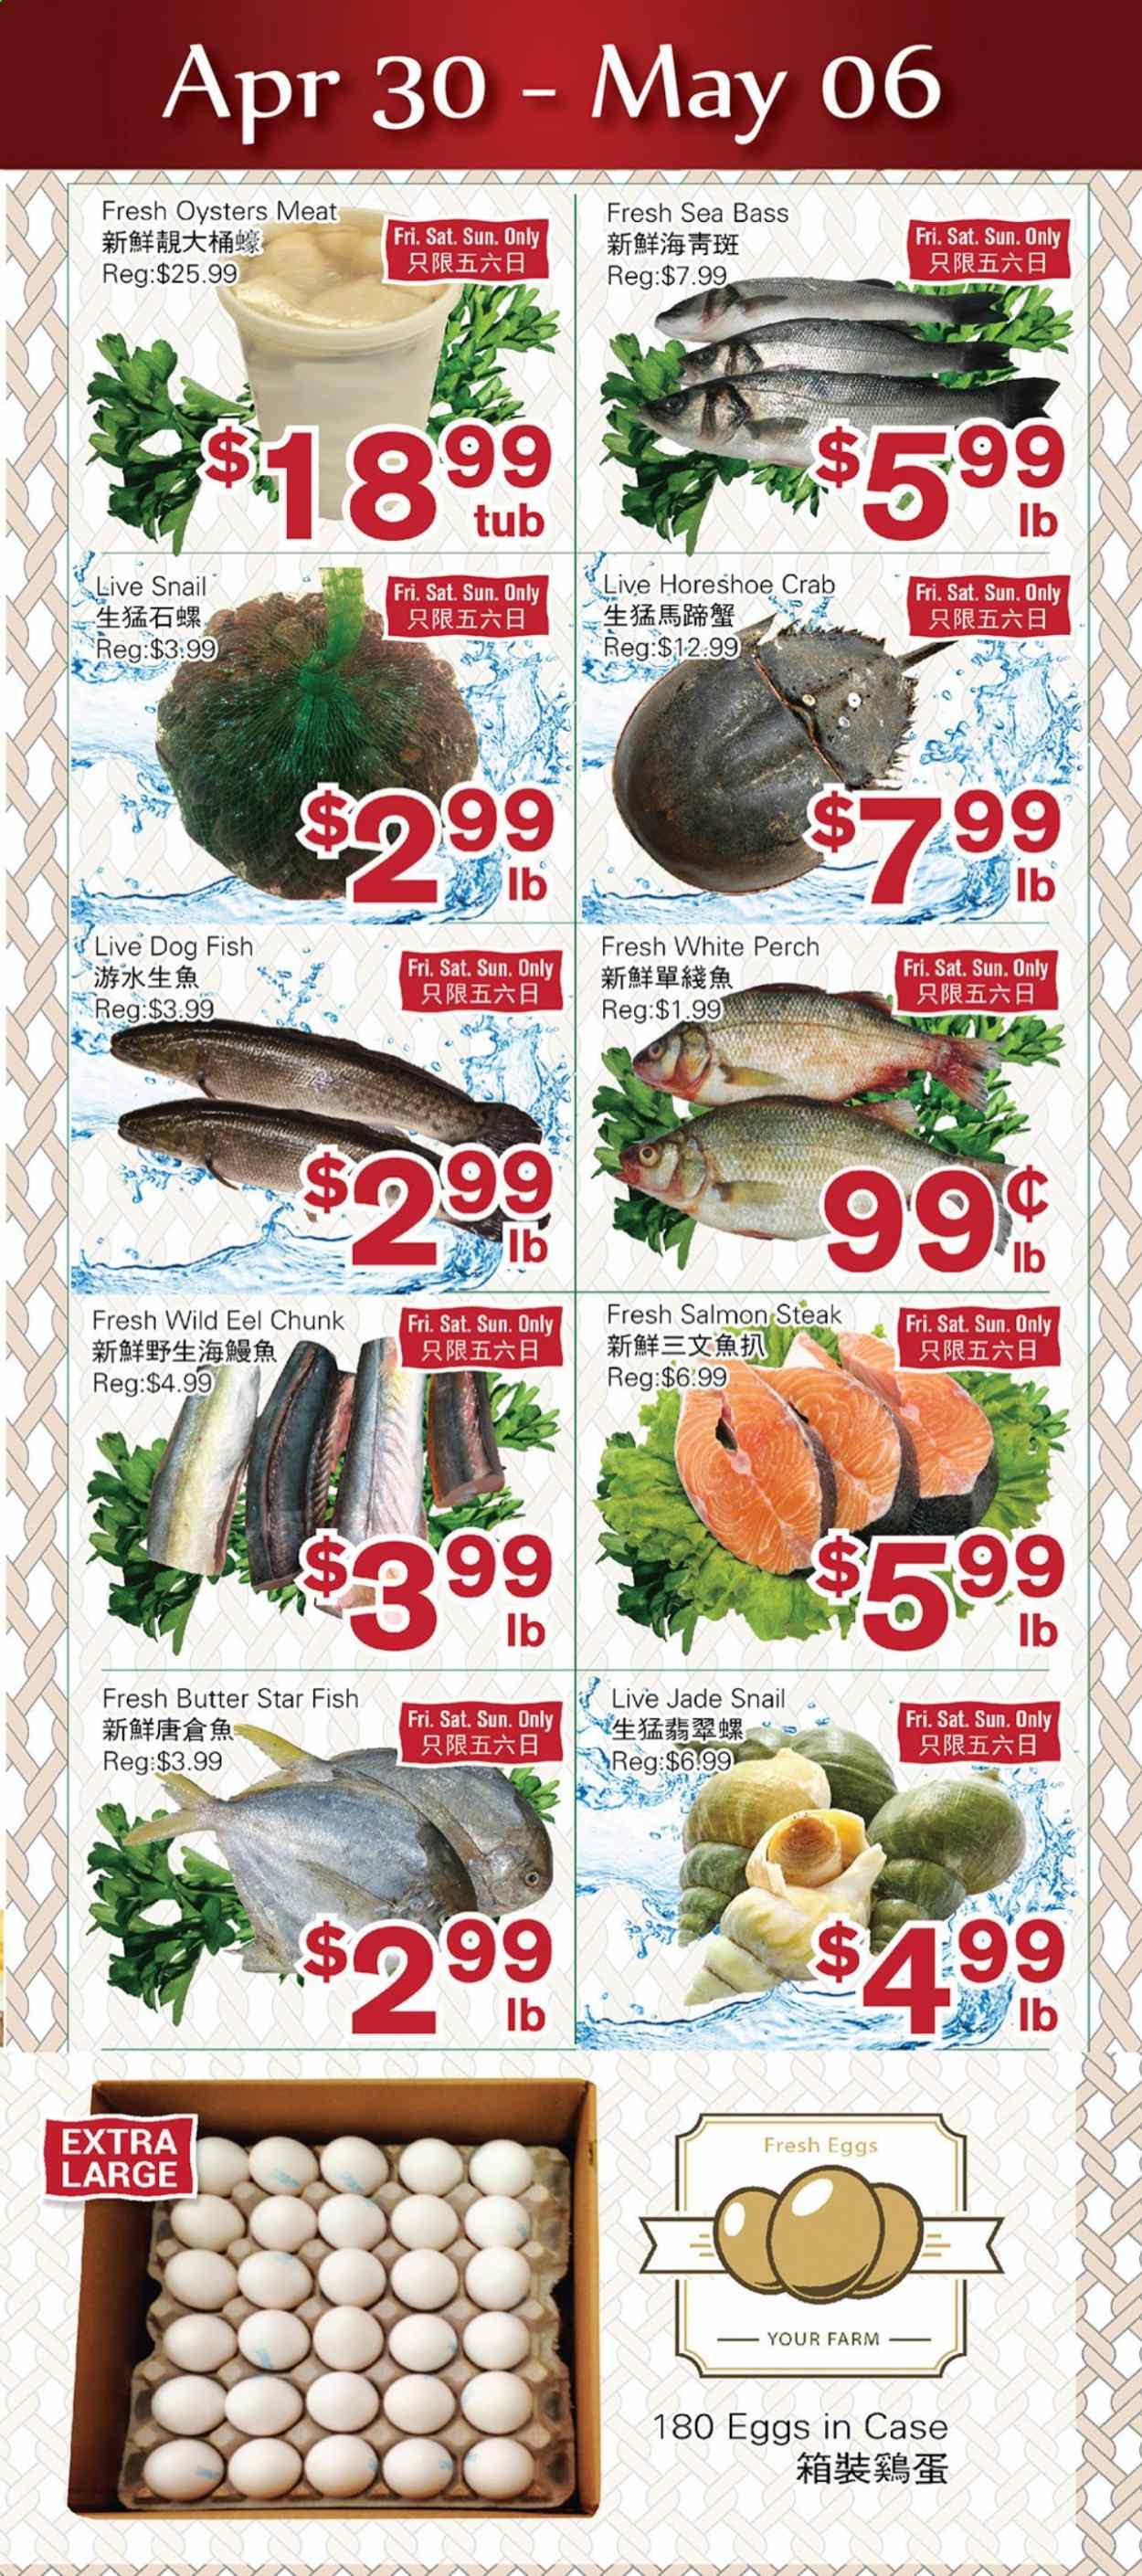 thumbnail - First Choice Supermarket Flyer - April 30, 2021 - May 06, 2021 - Sales products - eel, salmon, sea bass, perch, oysters, crab, fish, eggs, butter, steak. Page 1.